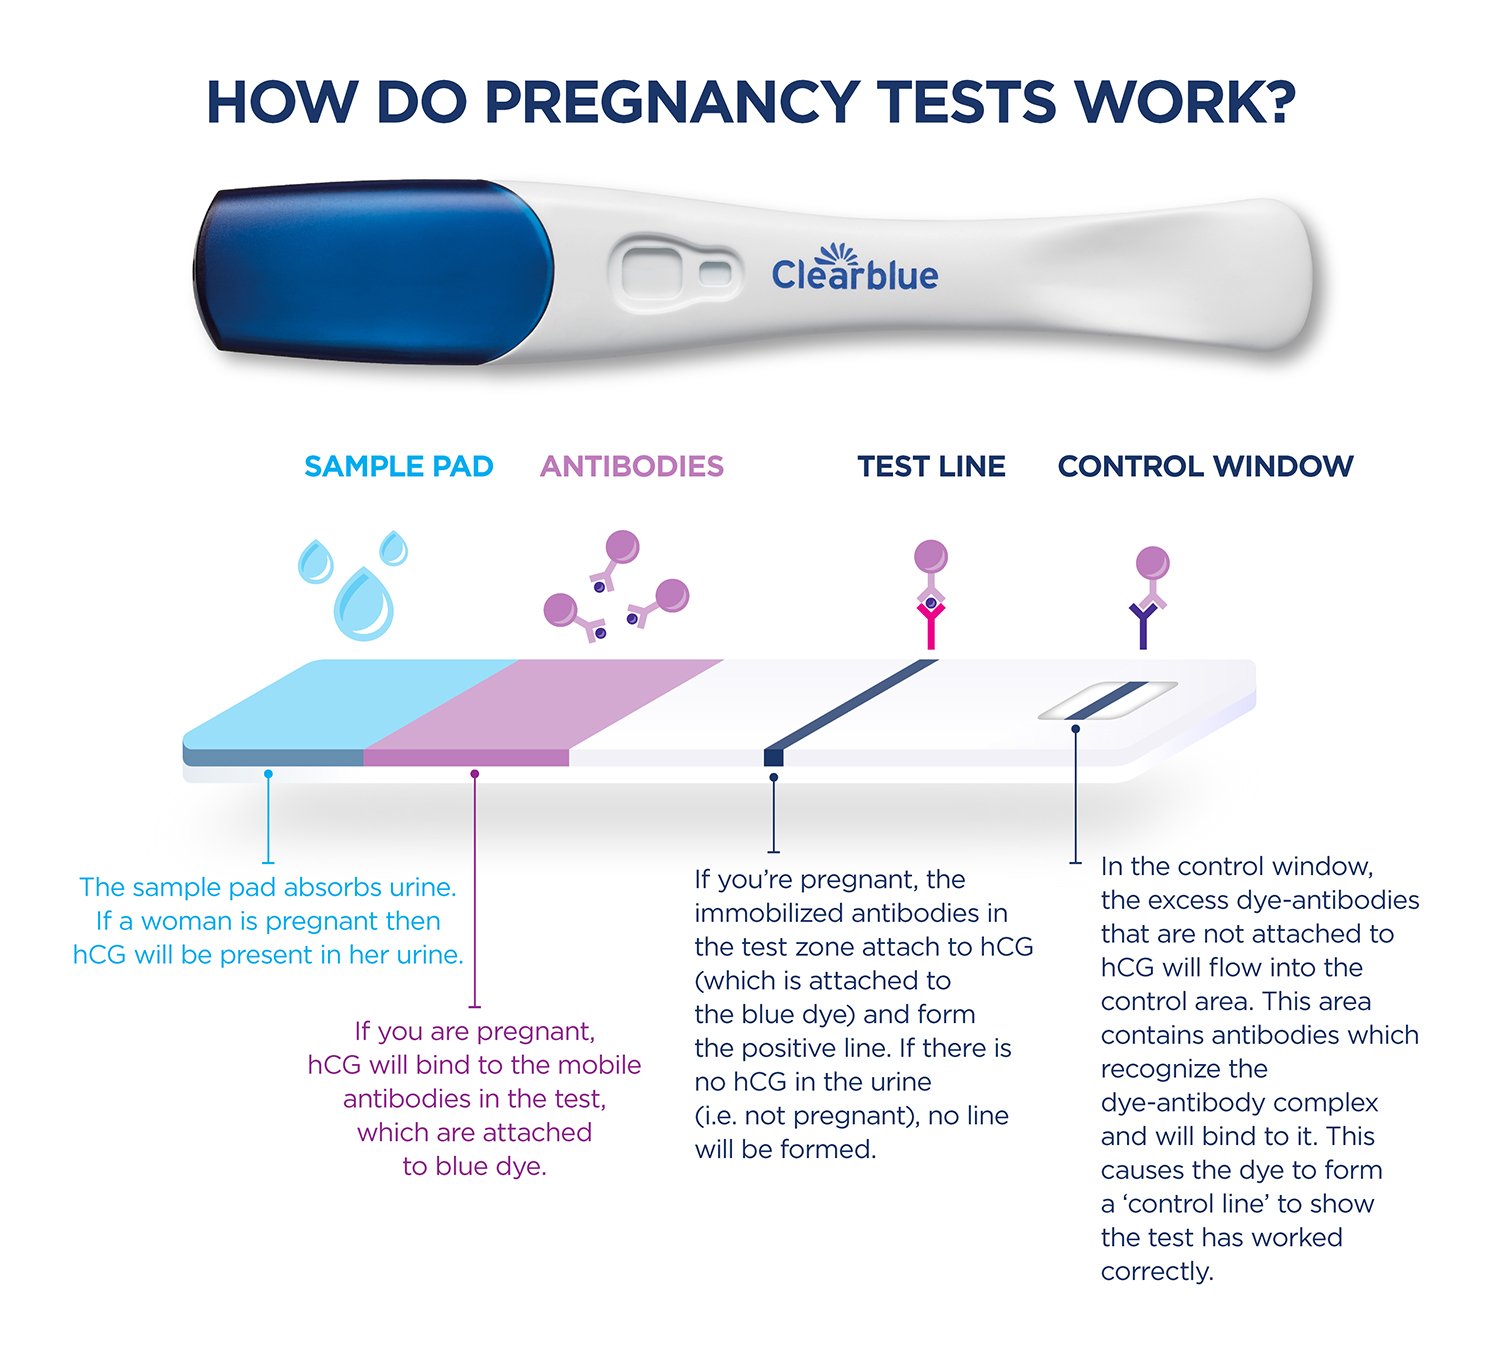 A Clearblue digital pregnancy test accompanied by an illustration showing the cross section of the test to show how a pregnancy test works